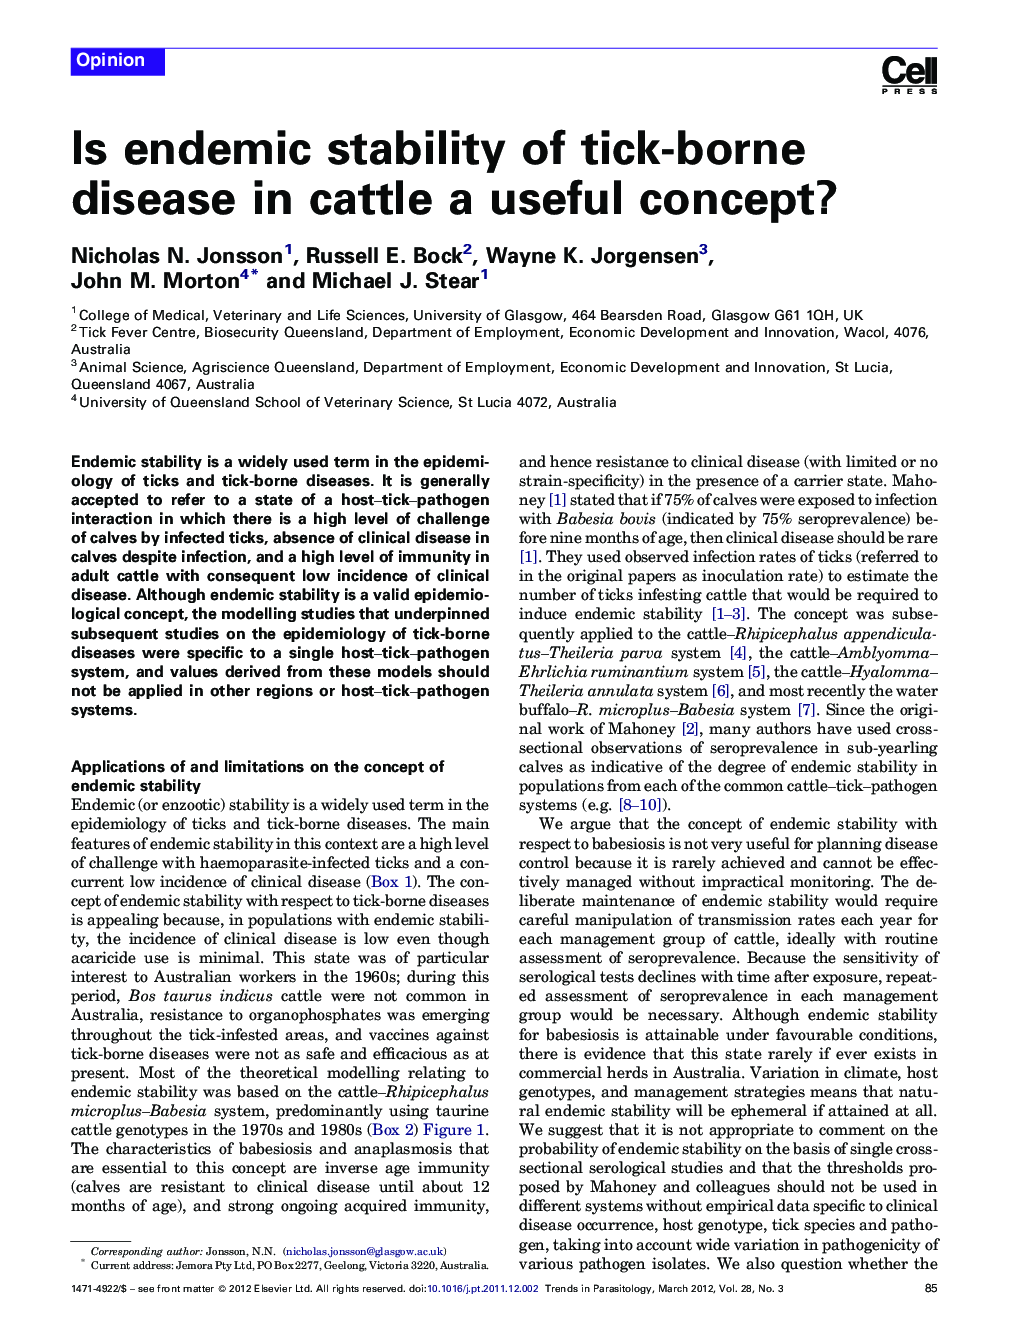 Is endemic stability of tick-borne disease in cattle a useful concept?